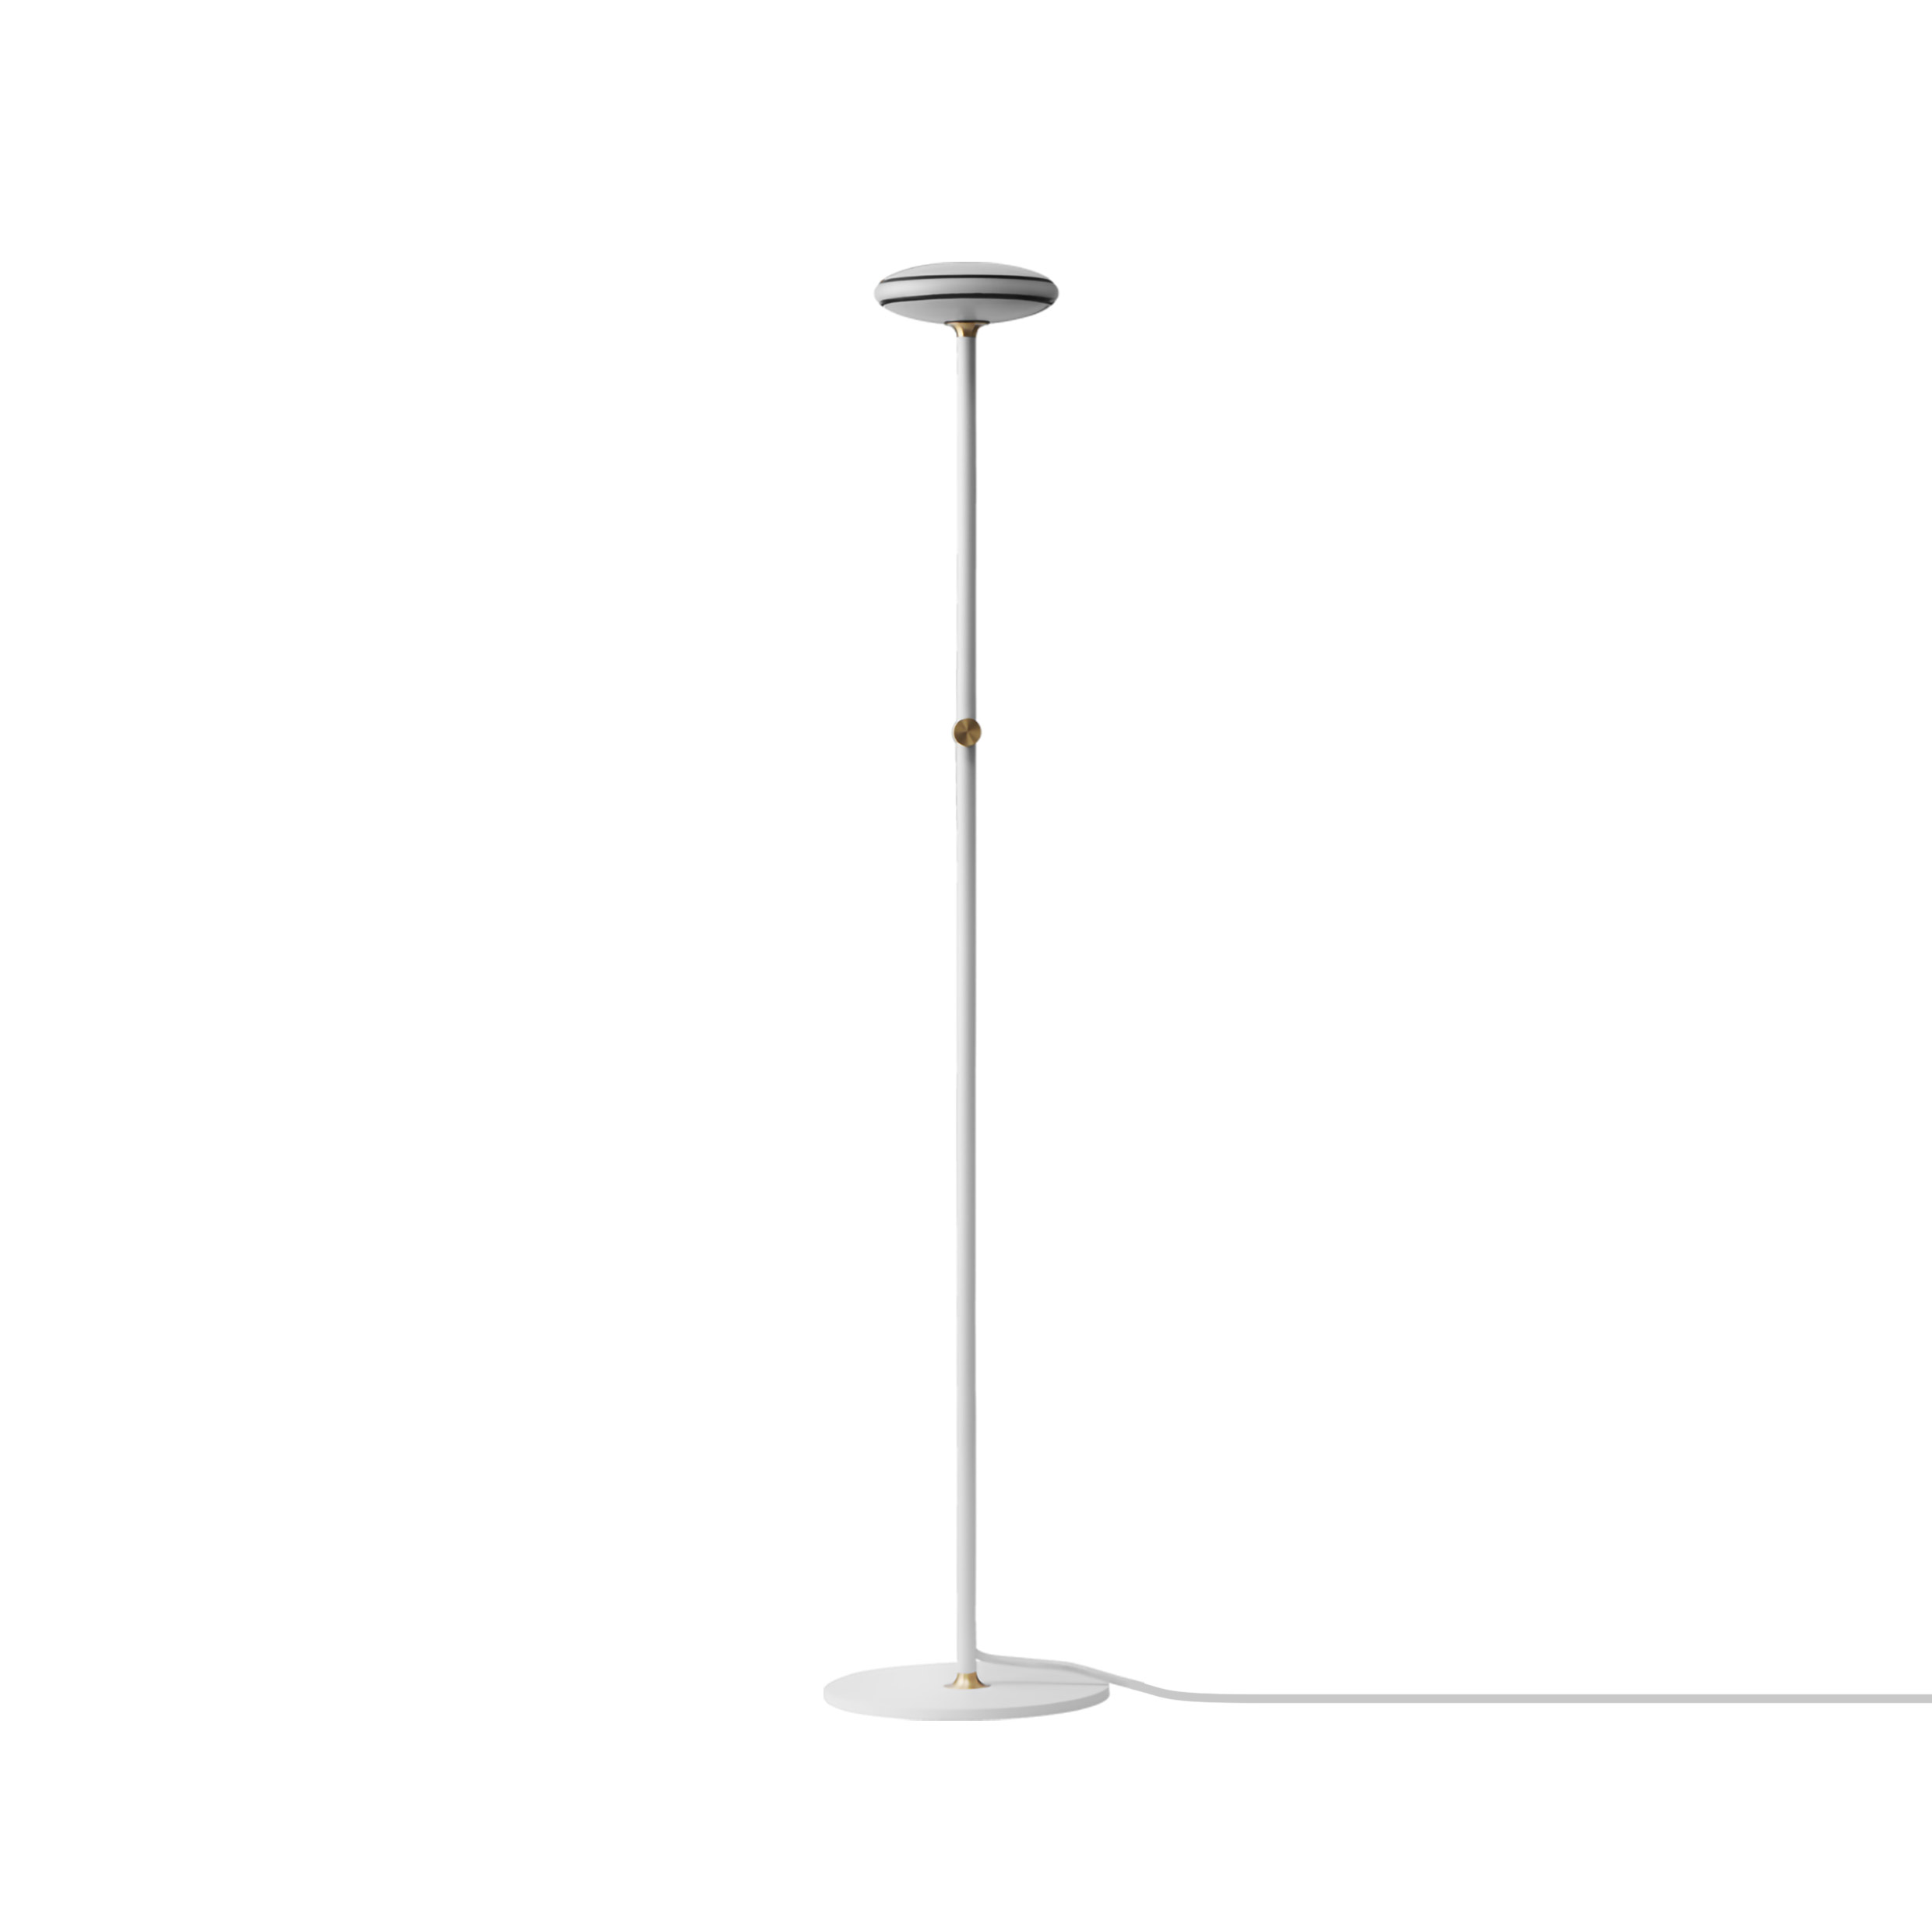 SHADE // ØS1 - TABLE LAMP | SMART LED LIGHT - WHITE - WITH REMOTE CONTROL